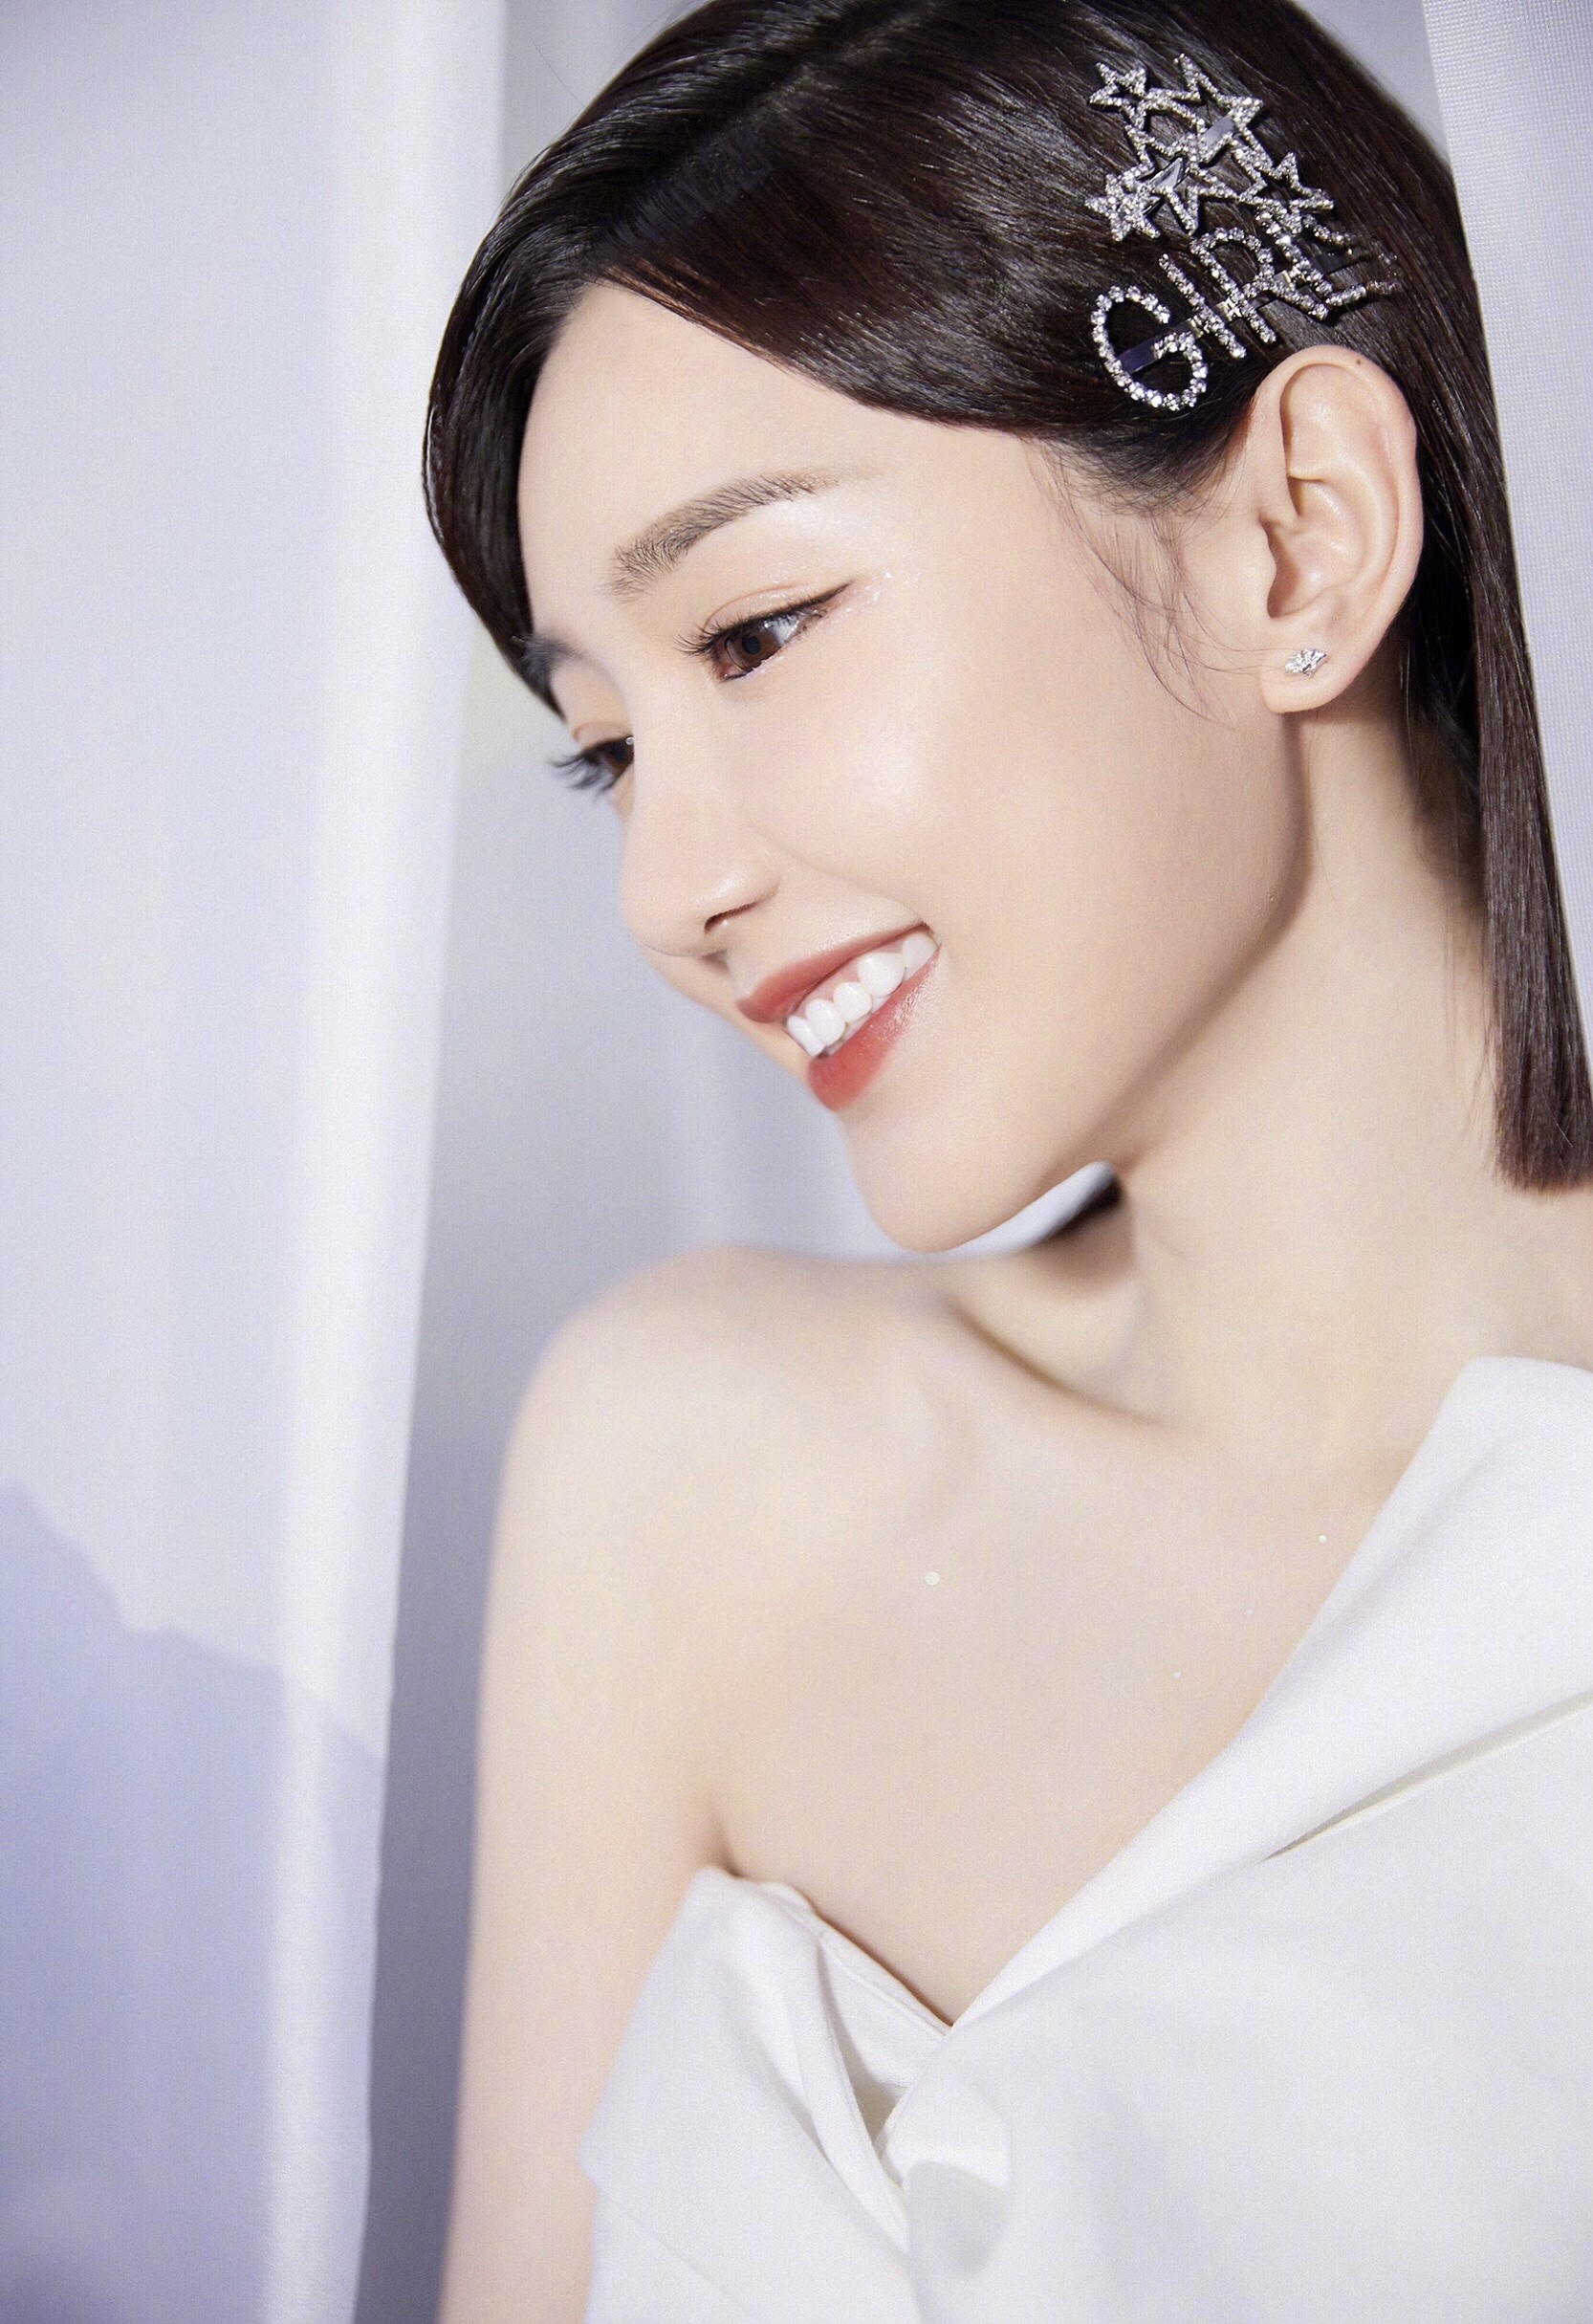 Asia Chinese Dress Women Star Academy Nature Simple Background Celebrity Mao Xiaotong Asian 1666x2430